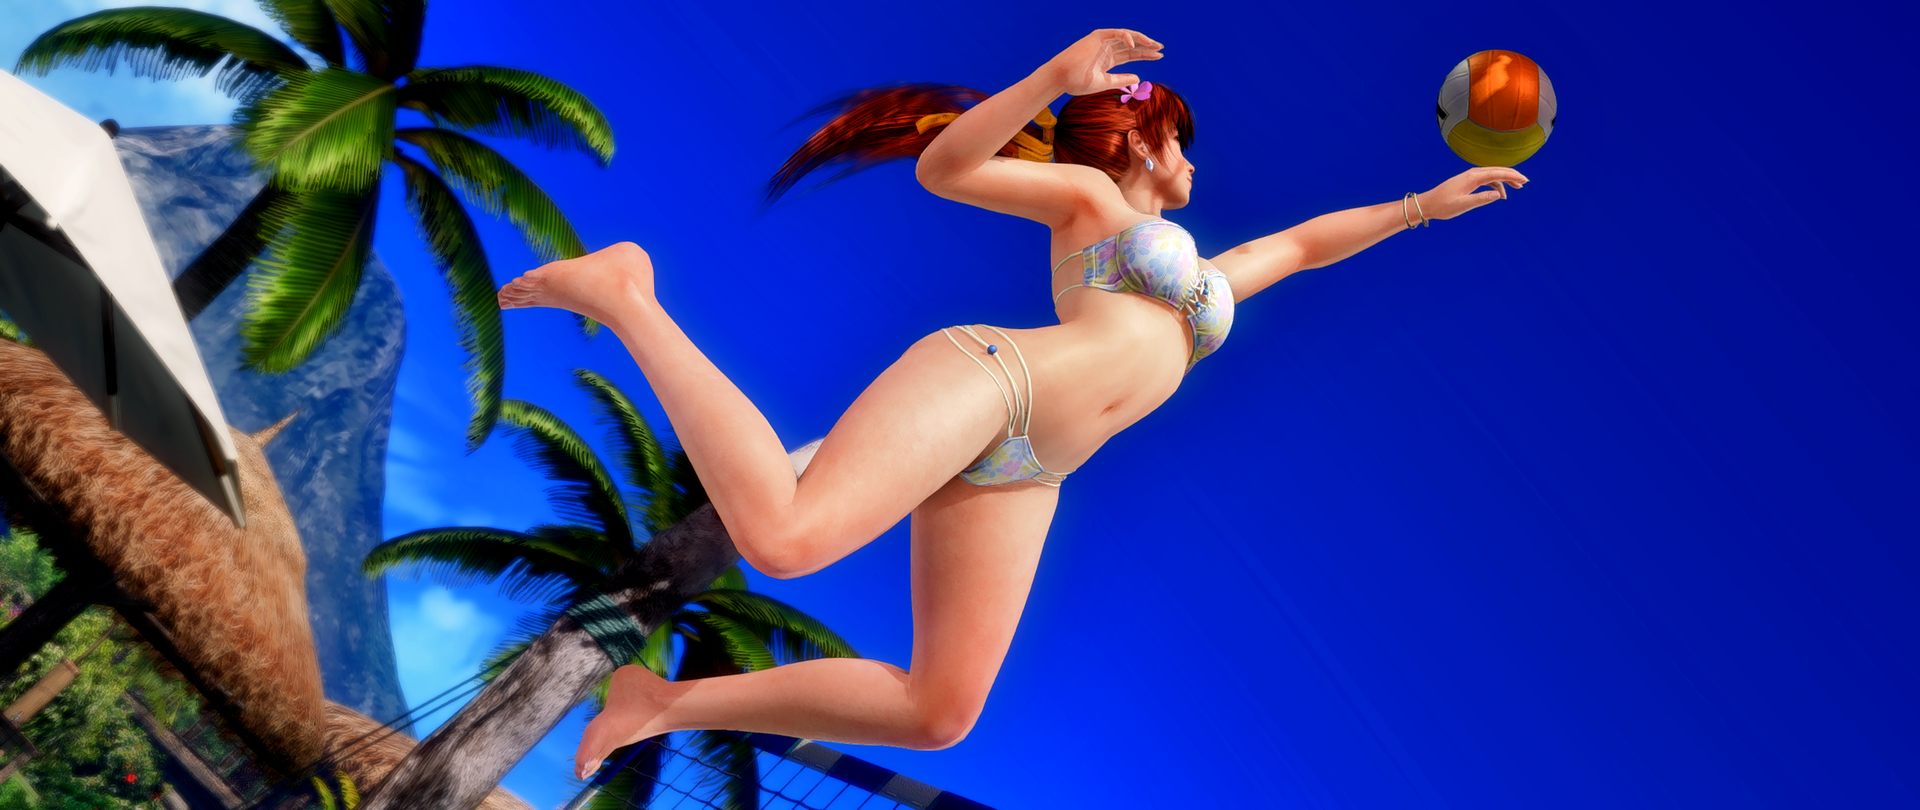 DEAD OR ALIVE Xtreme Venus Vacation屏幕快照2020.01.16-19.08.27.86.png